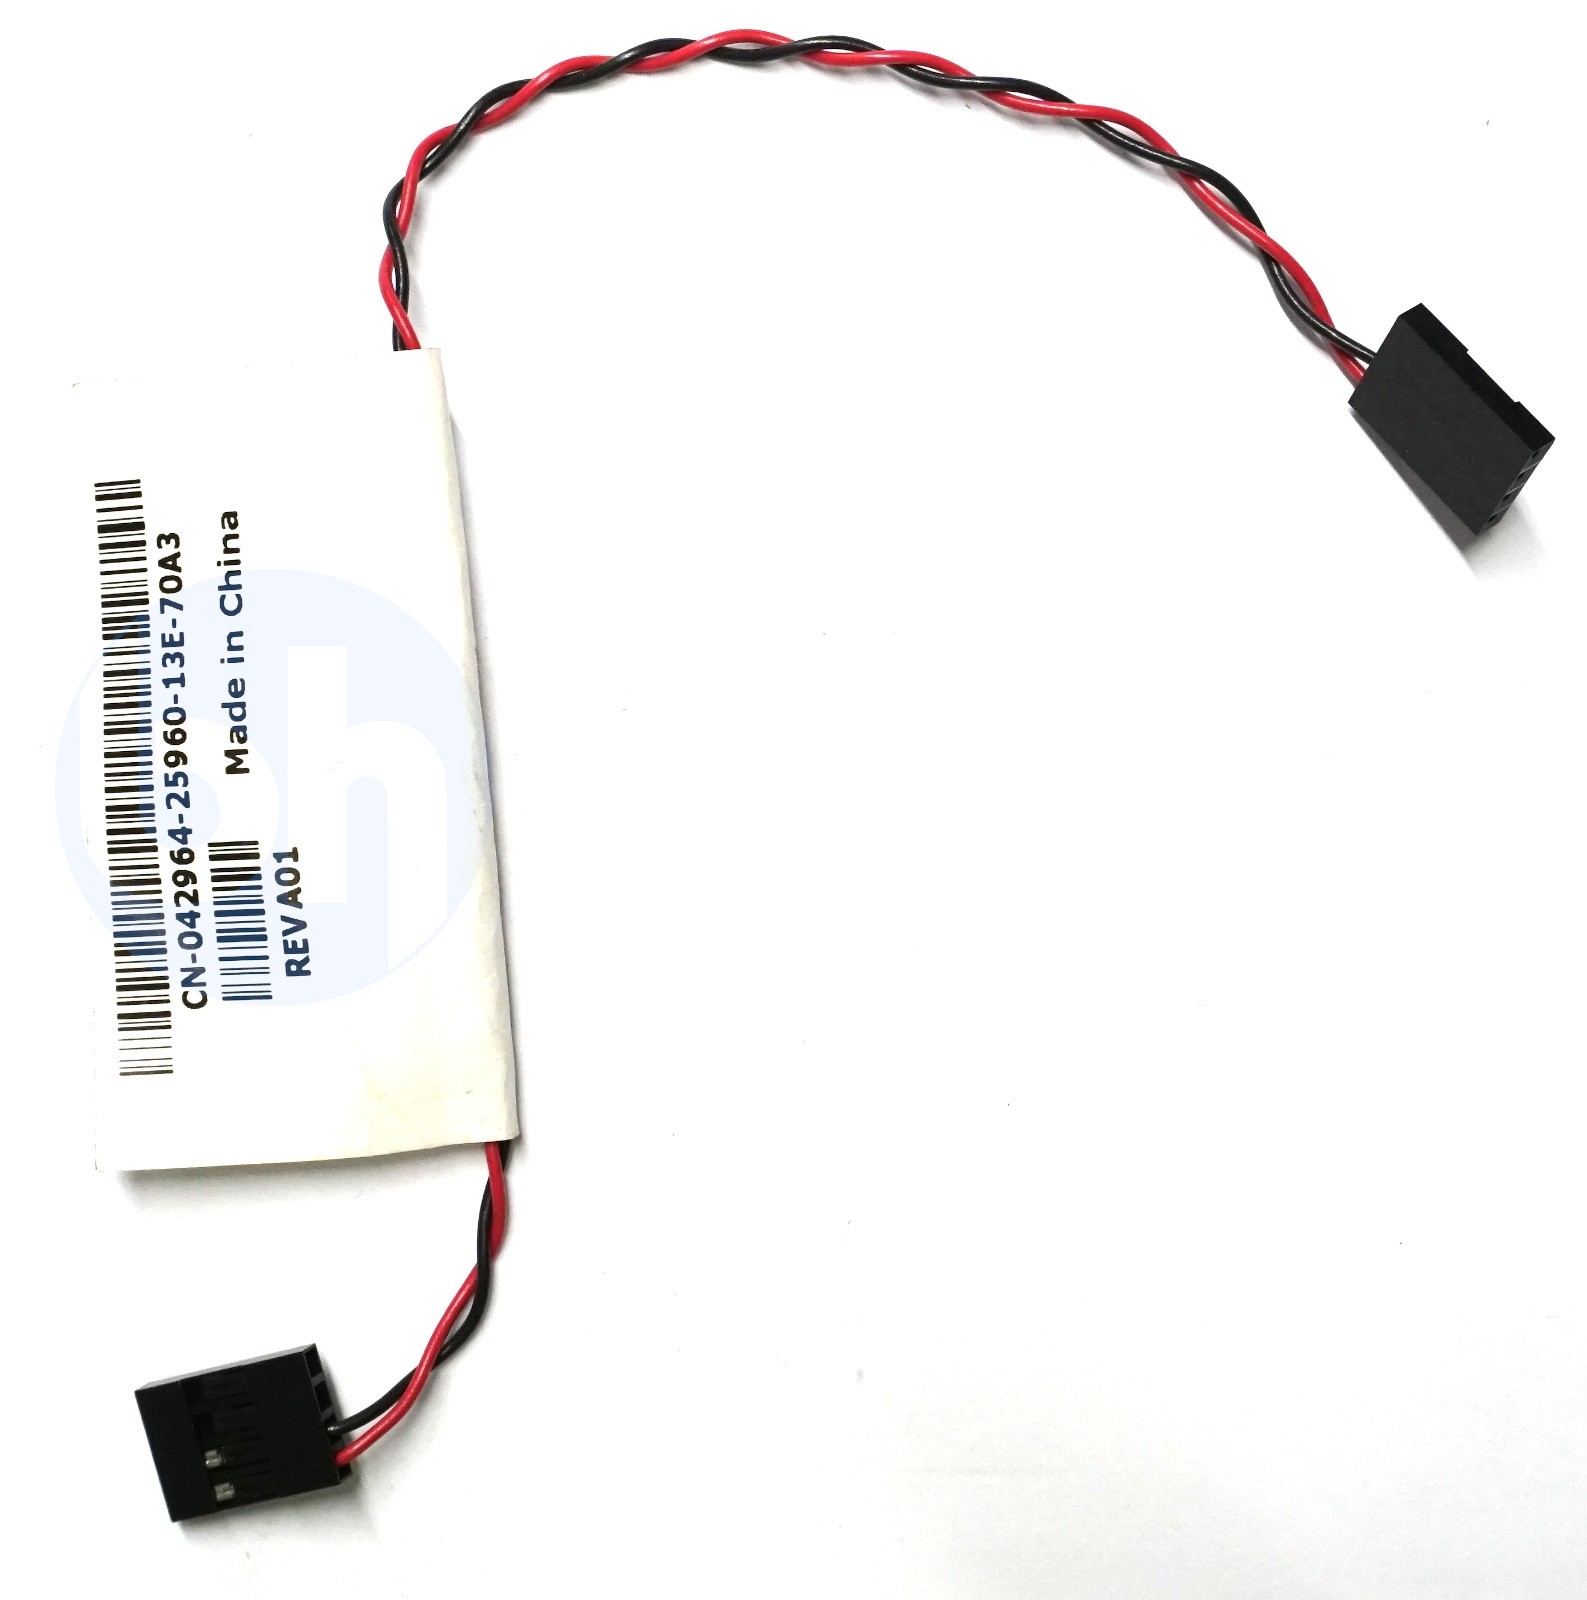 Dell PowerEdge 860, R200 - PERC HDD Status LED Cable 7"